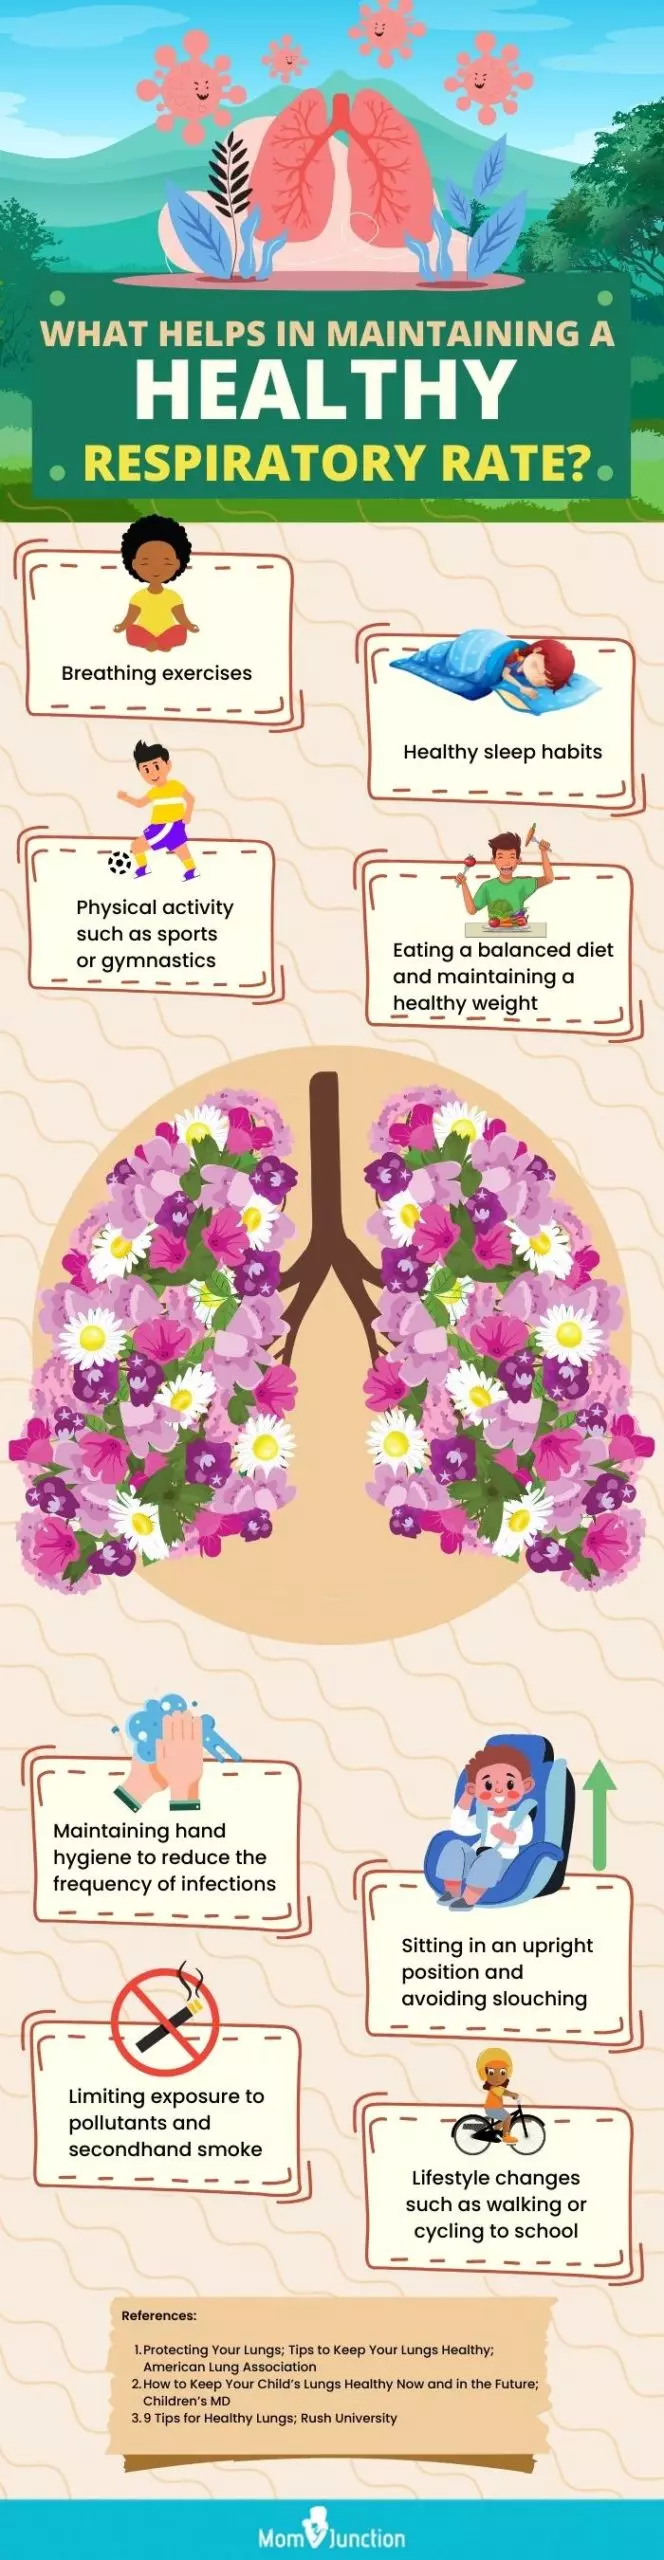 what helps in maintaining a healthy respiratory rate (infographic)